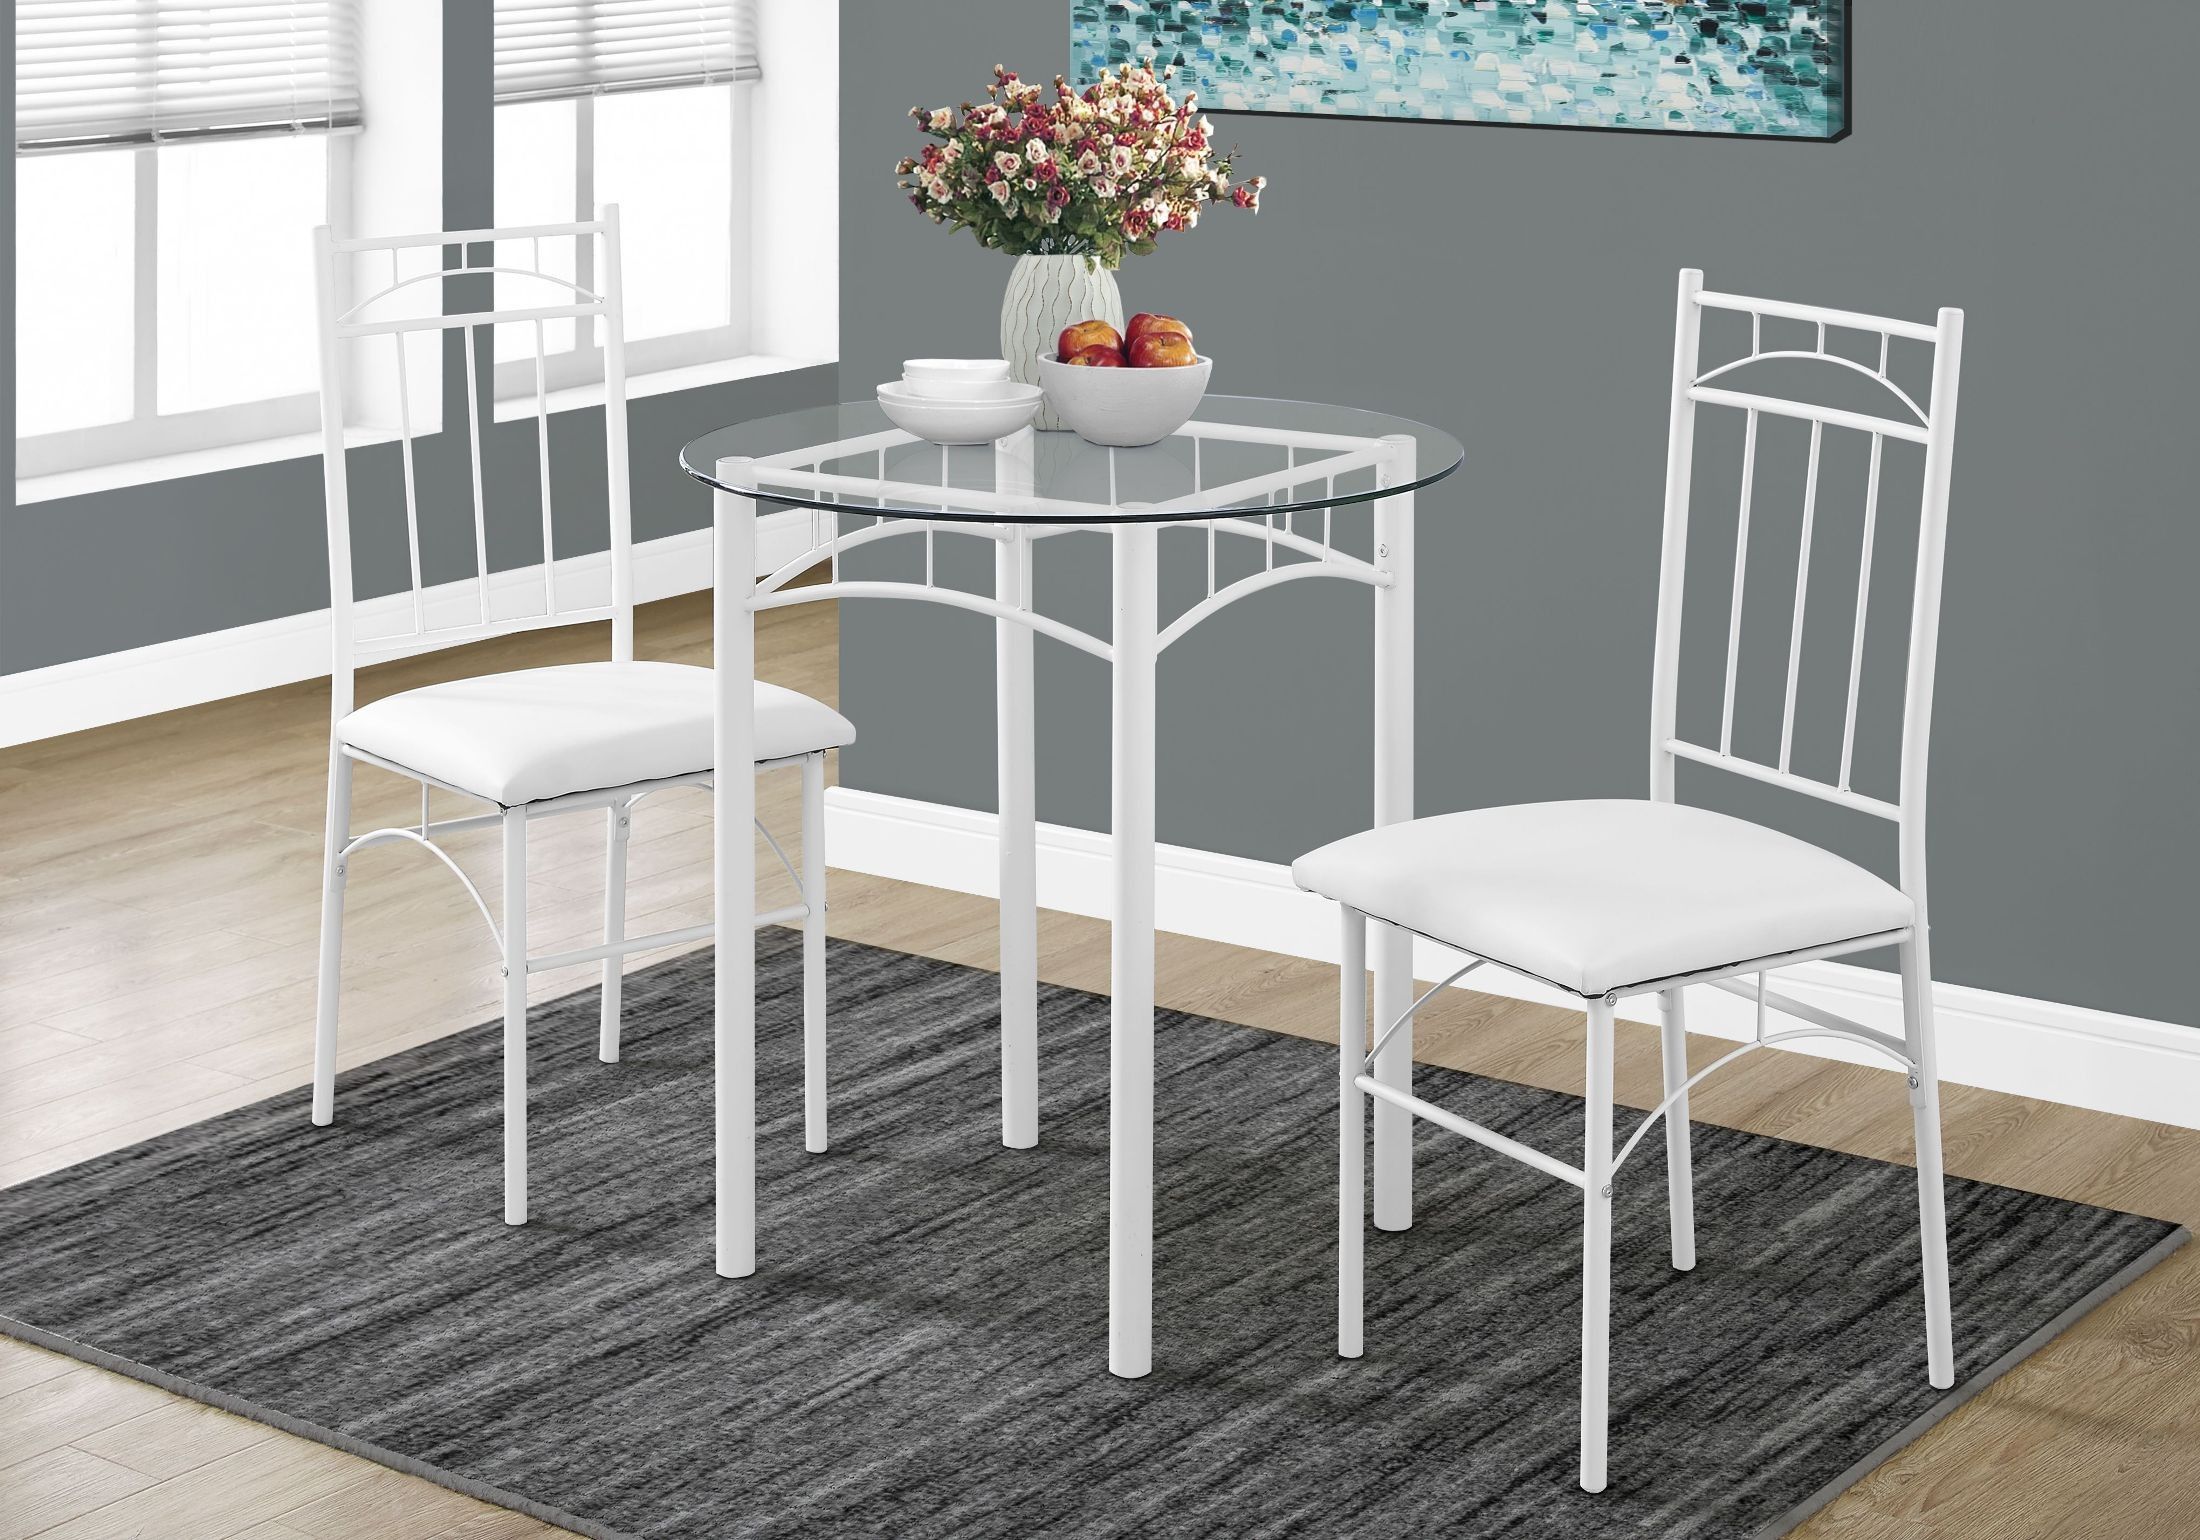 White Metal 3 Piece Dining Room Set From Monarch | Coleman Furniture Intended For 3 Piece Bistro Dining Sets (View 11 of 15)